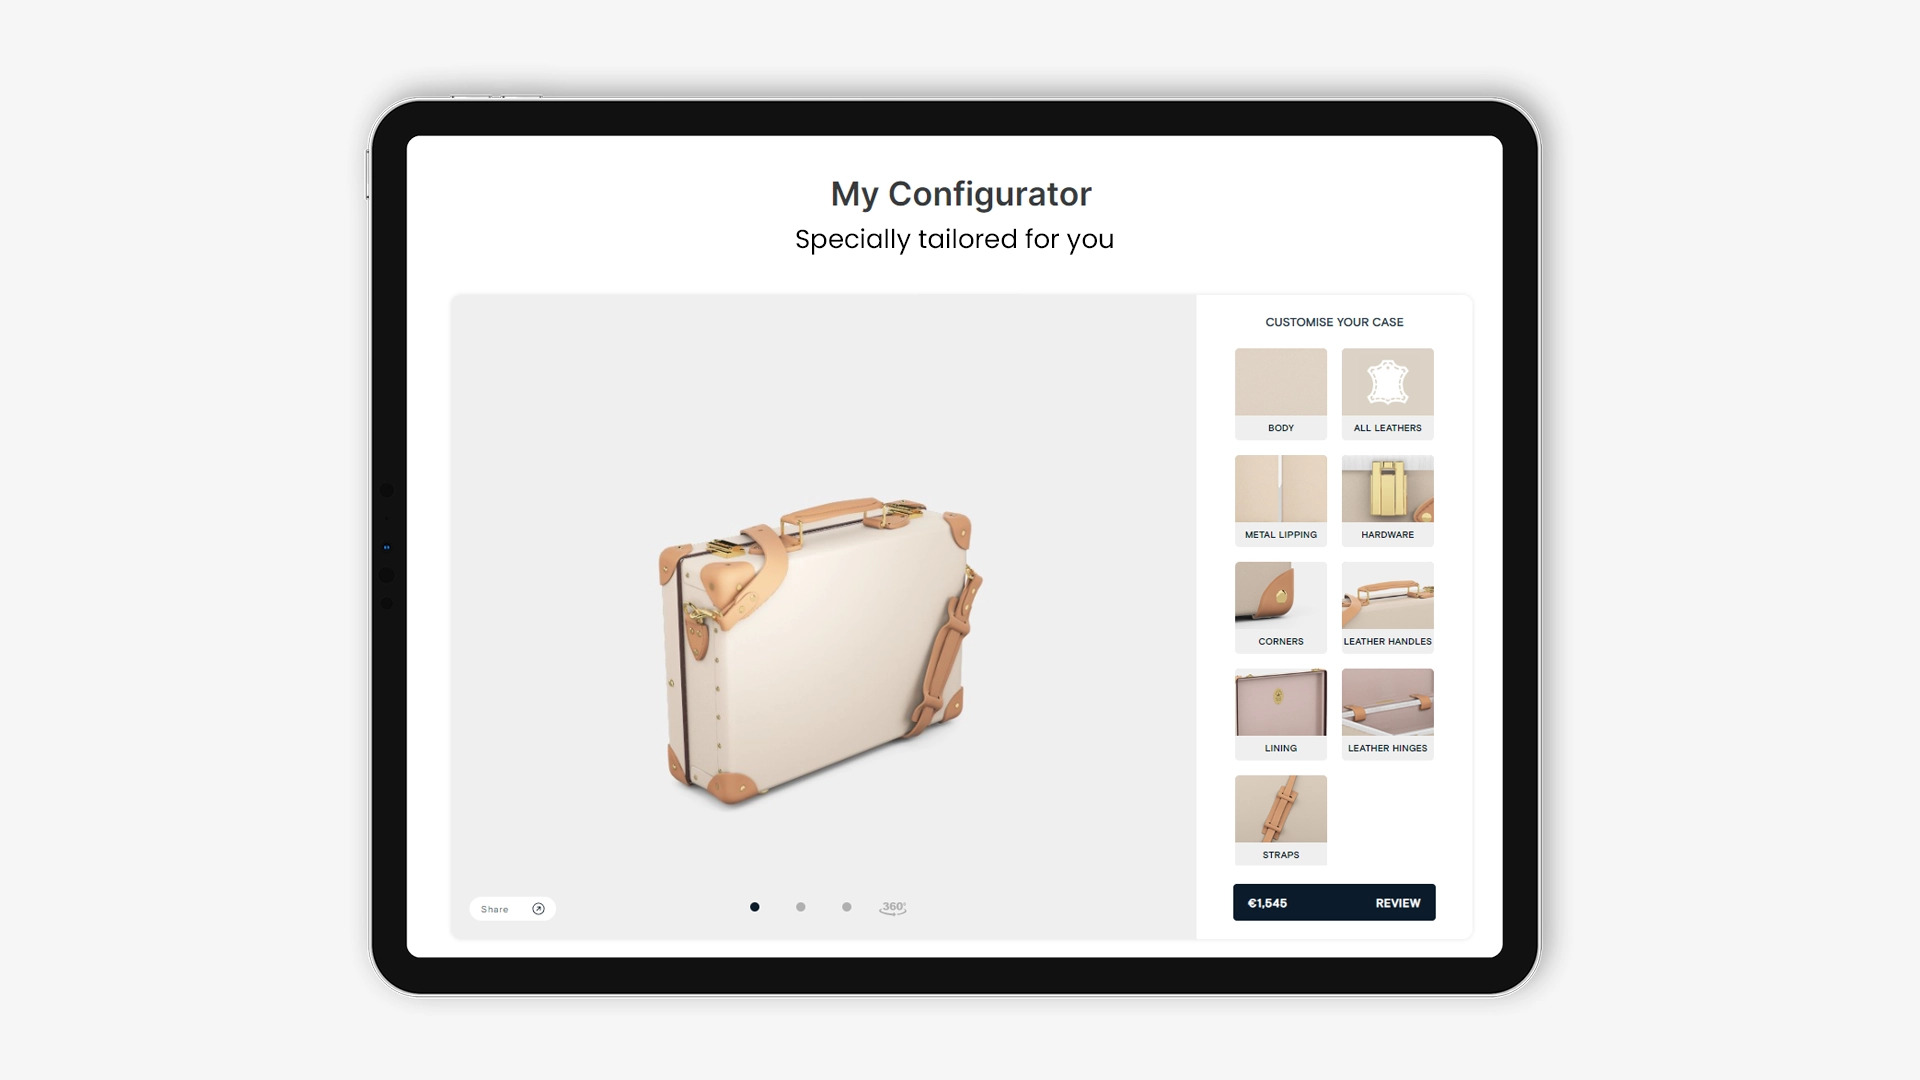 Personalized 3D Product Configurator for clienteling